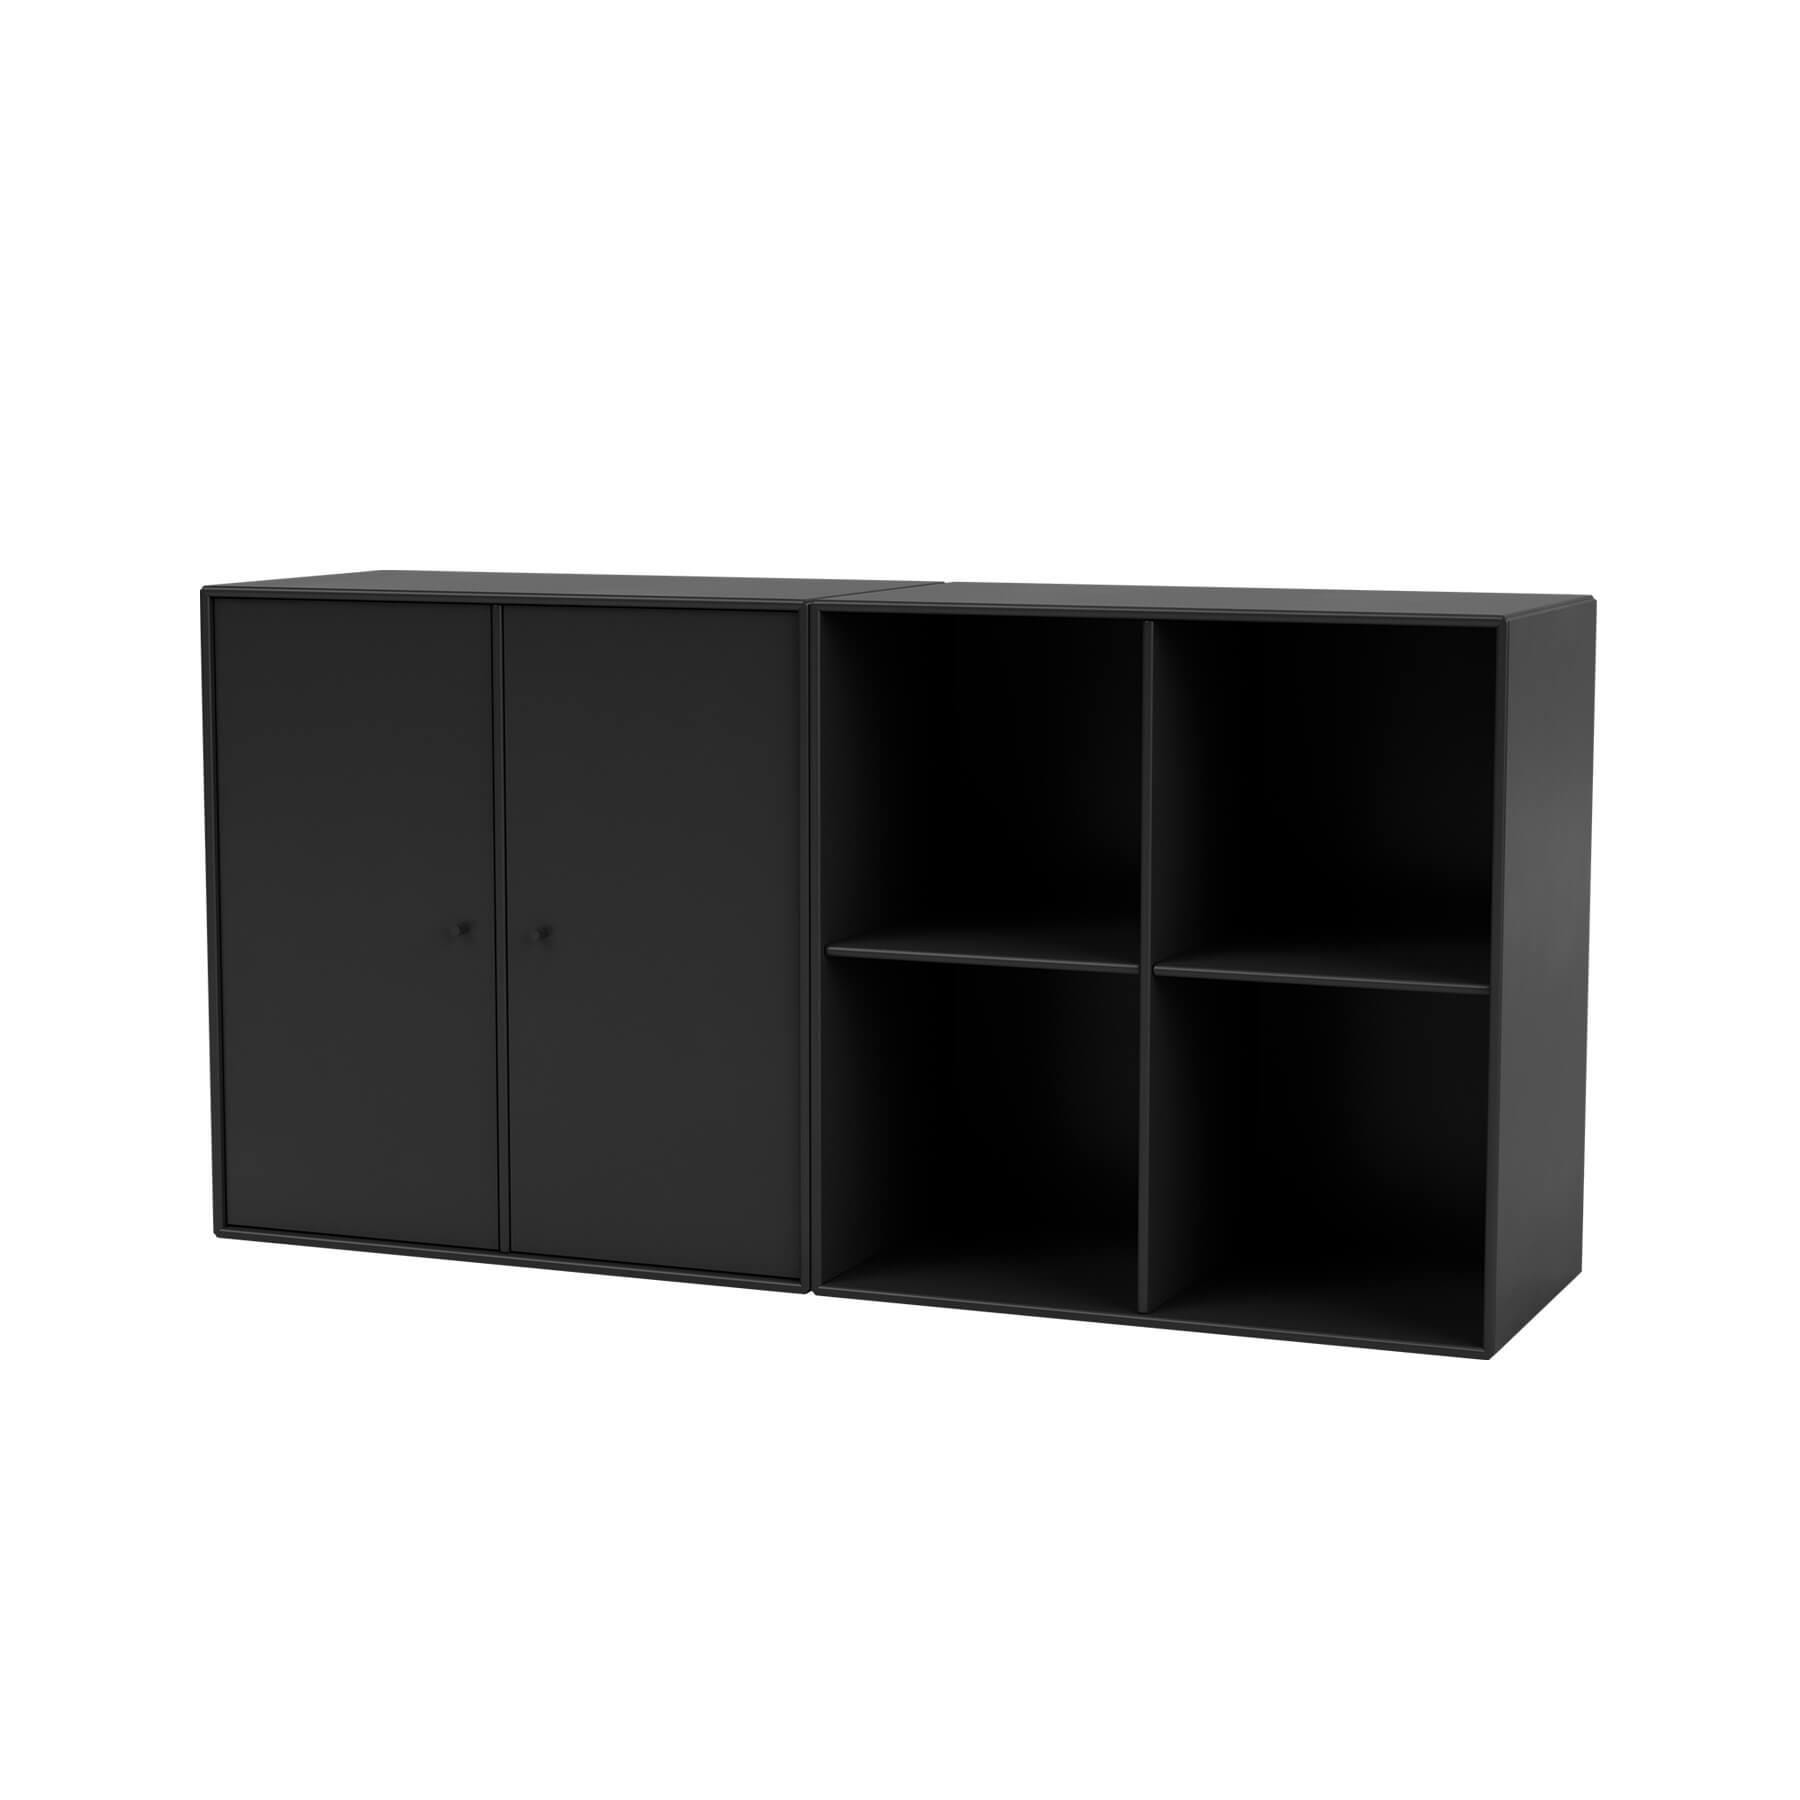 Montana Pair Classic Sideboard Black Wall Mounted Black Designer Furniture From Holloways Of Ludlow